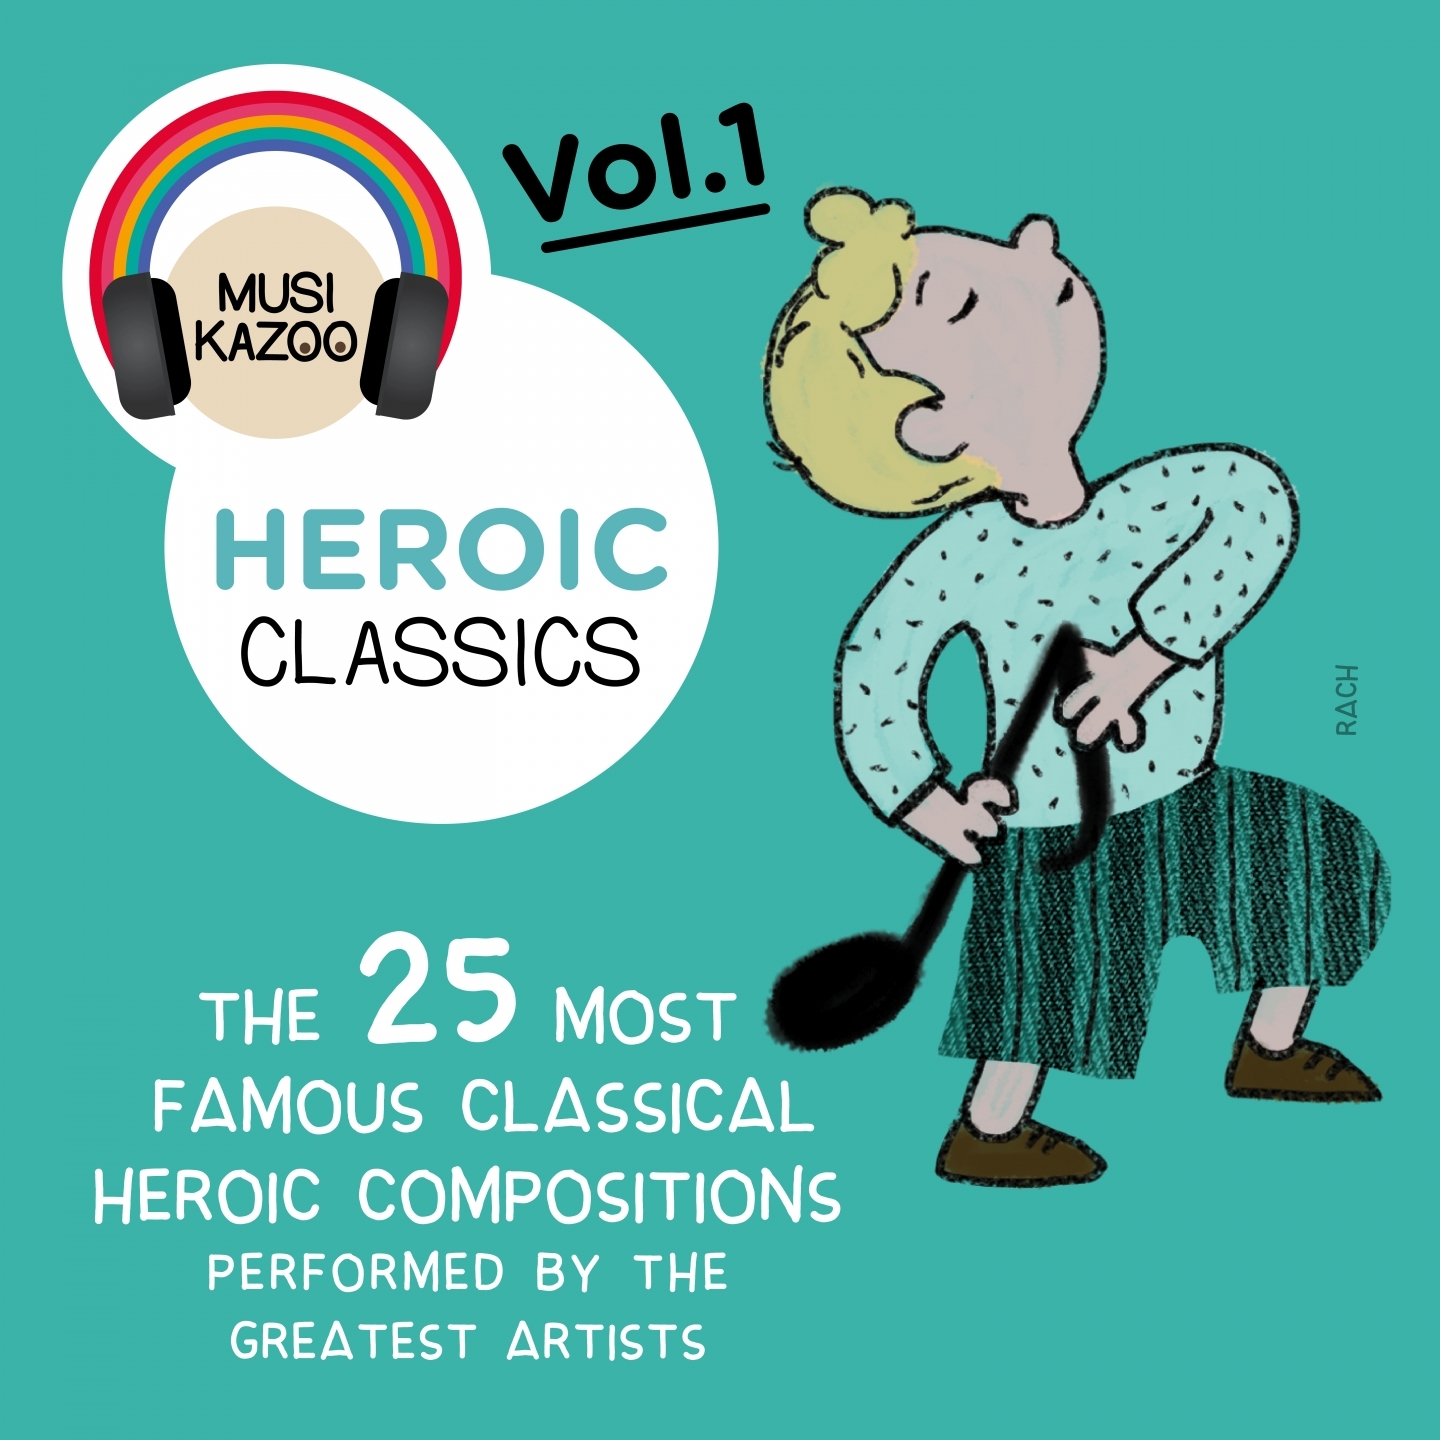 Six Musical Moments D. 780, Op. 94, D. 780: No. 5 in F Minor, Allegro vivace